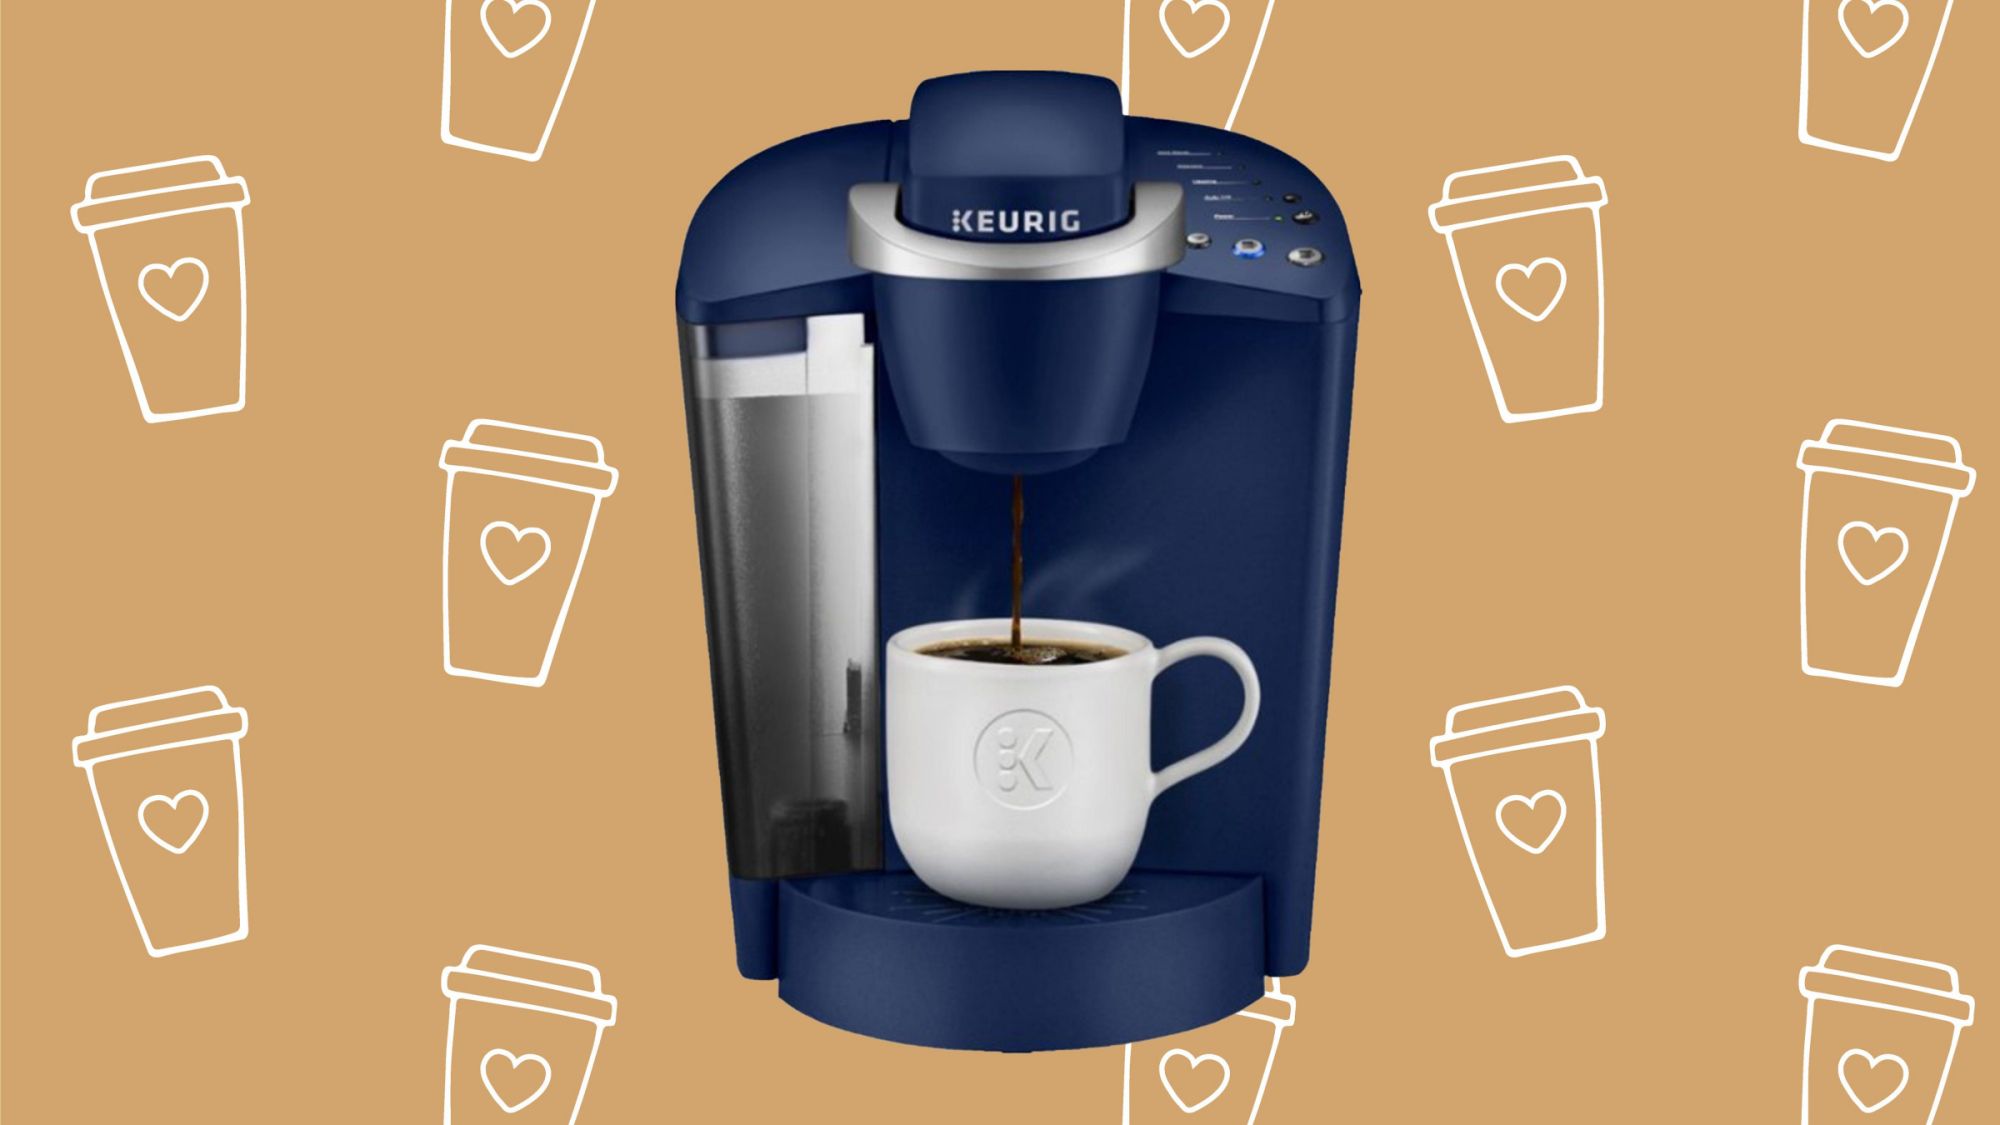 This popular Keurig K-Classic coffee maker is at a huge discount—but only for today